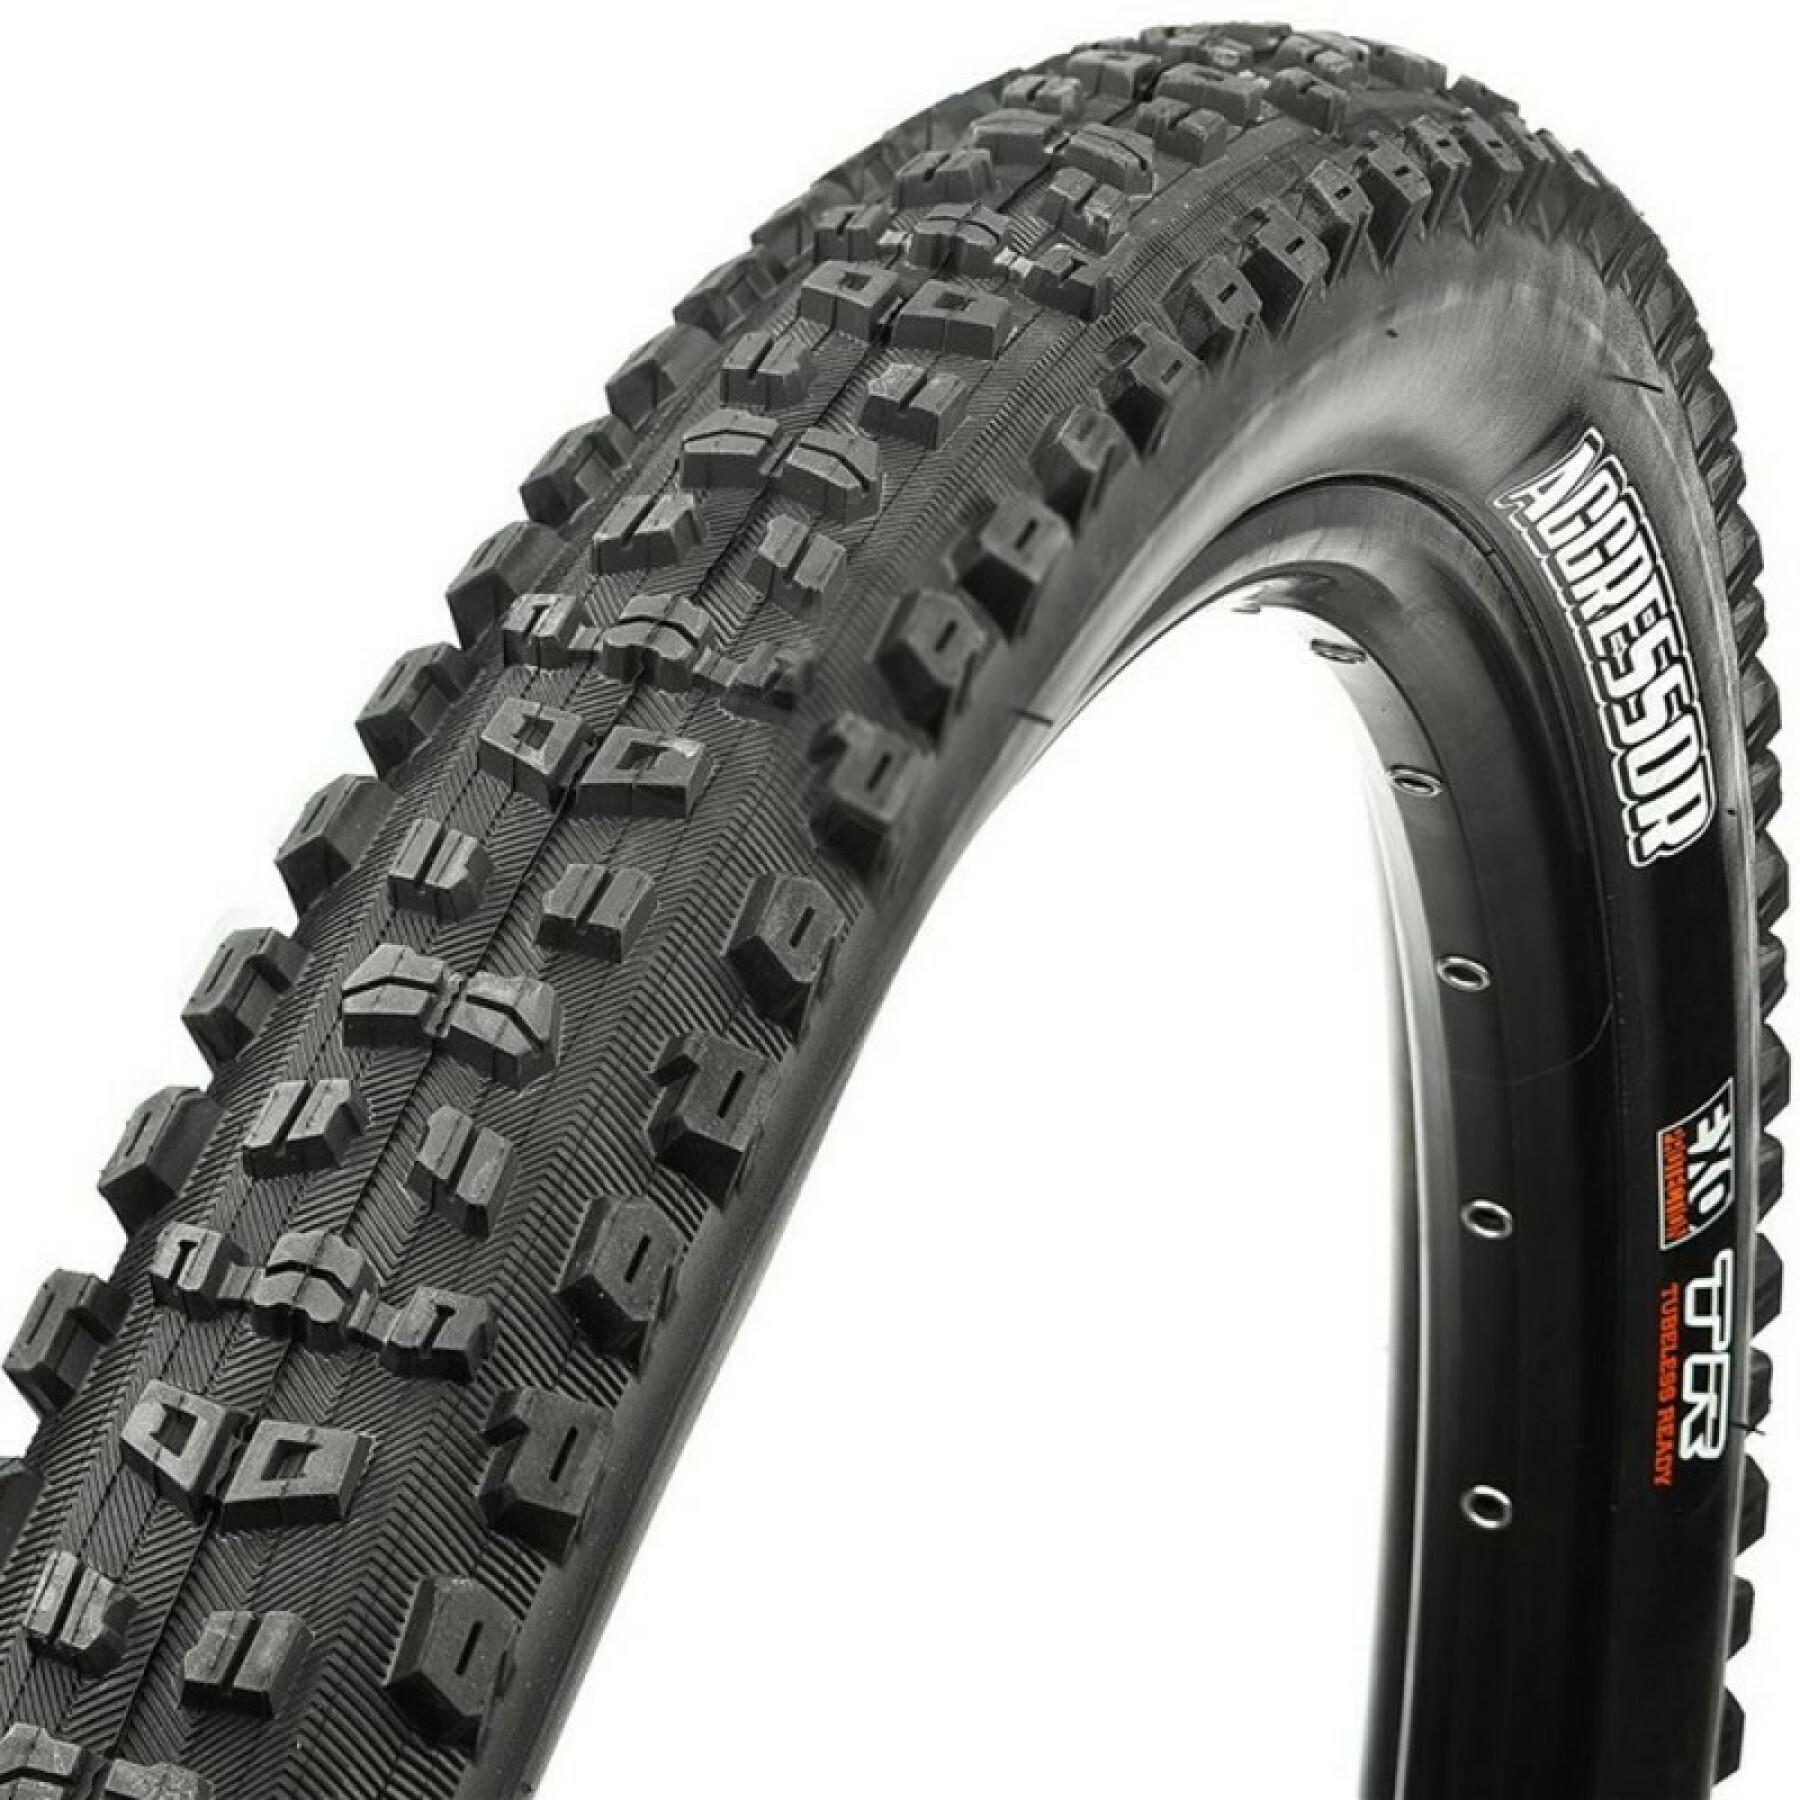 Tubeless soft tire Maxxis Aggressor Exo